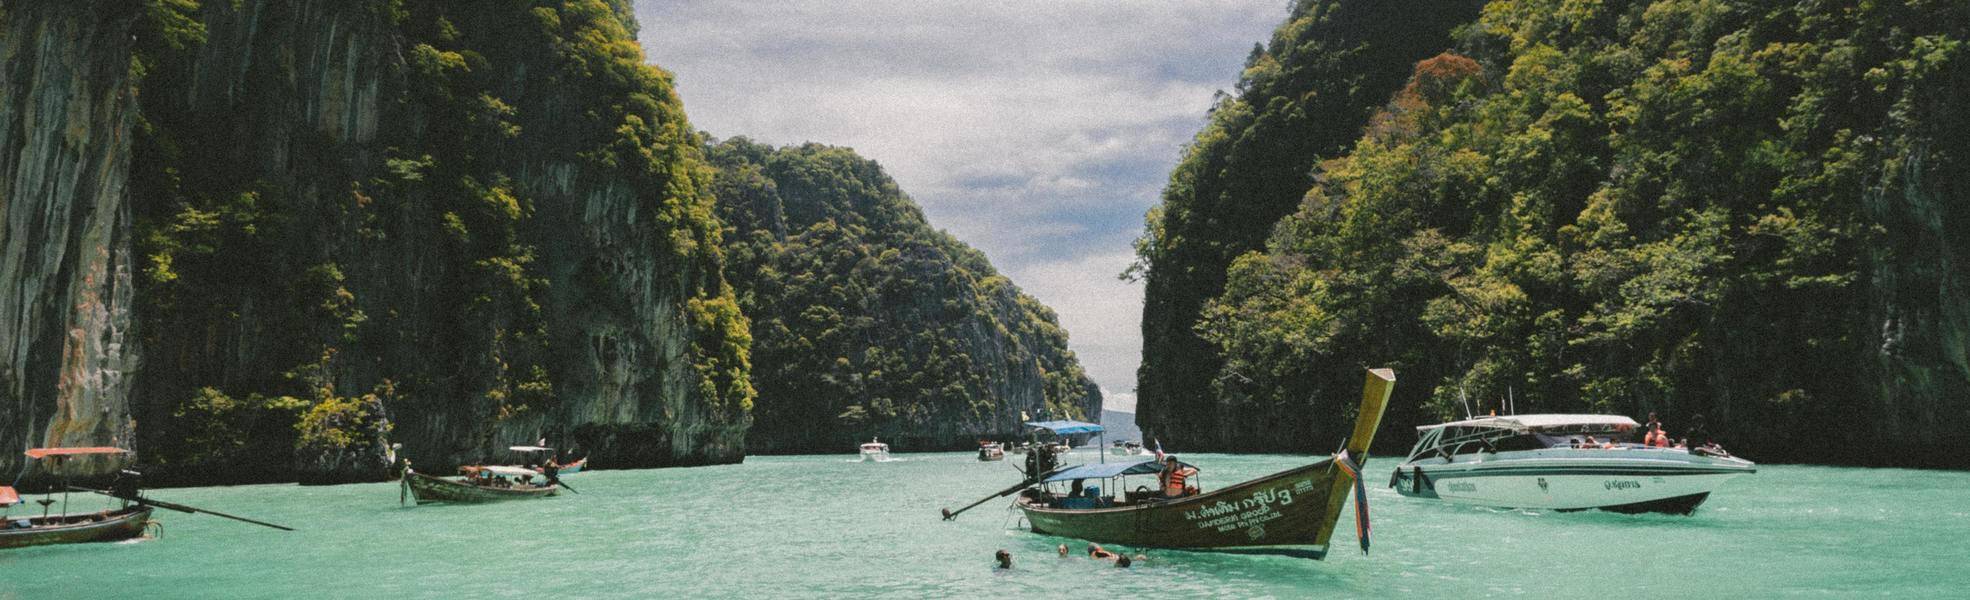 Aspects that will make your FWA in Vietnam unforgettable